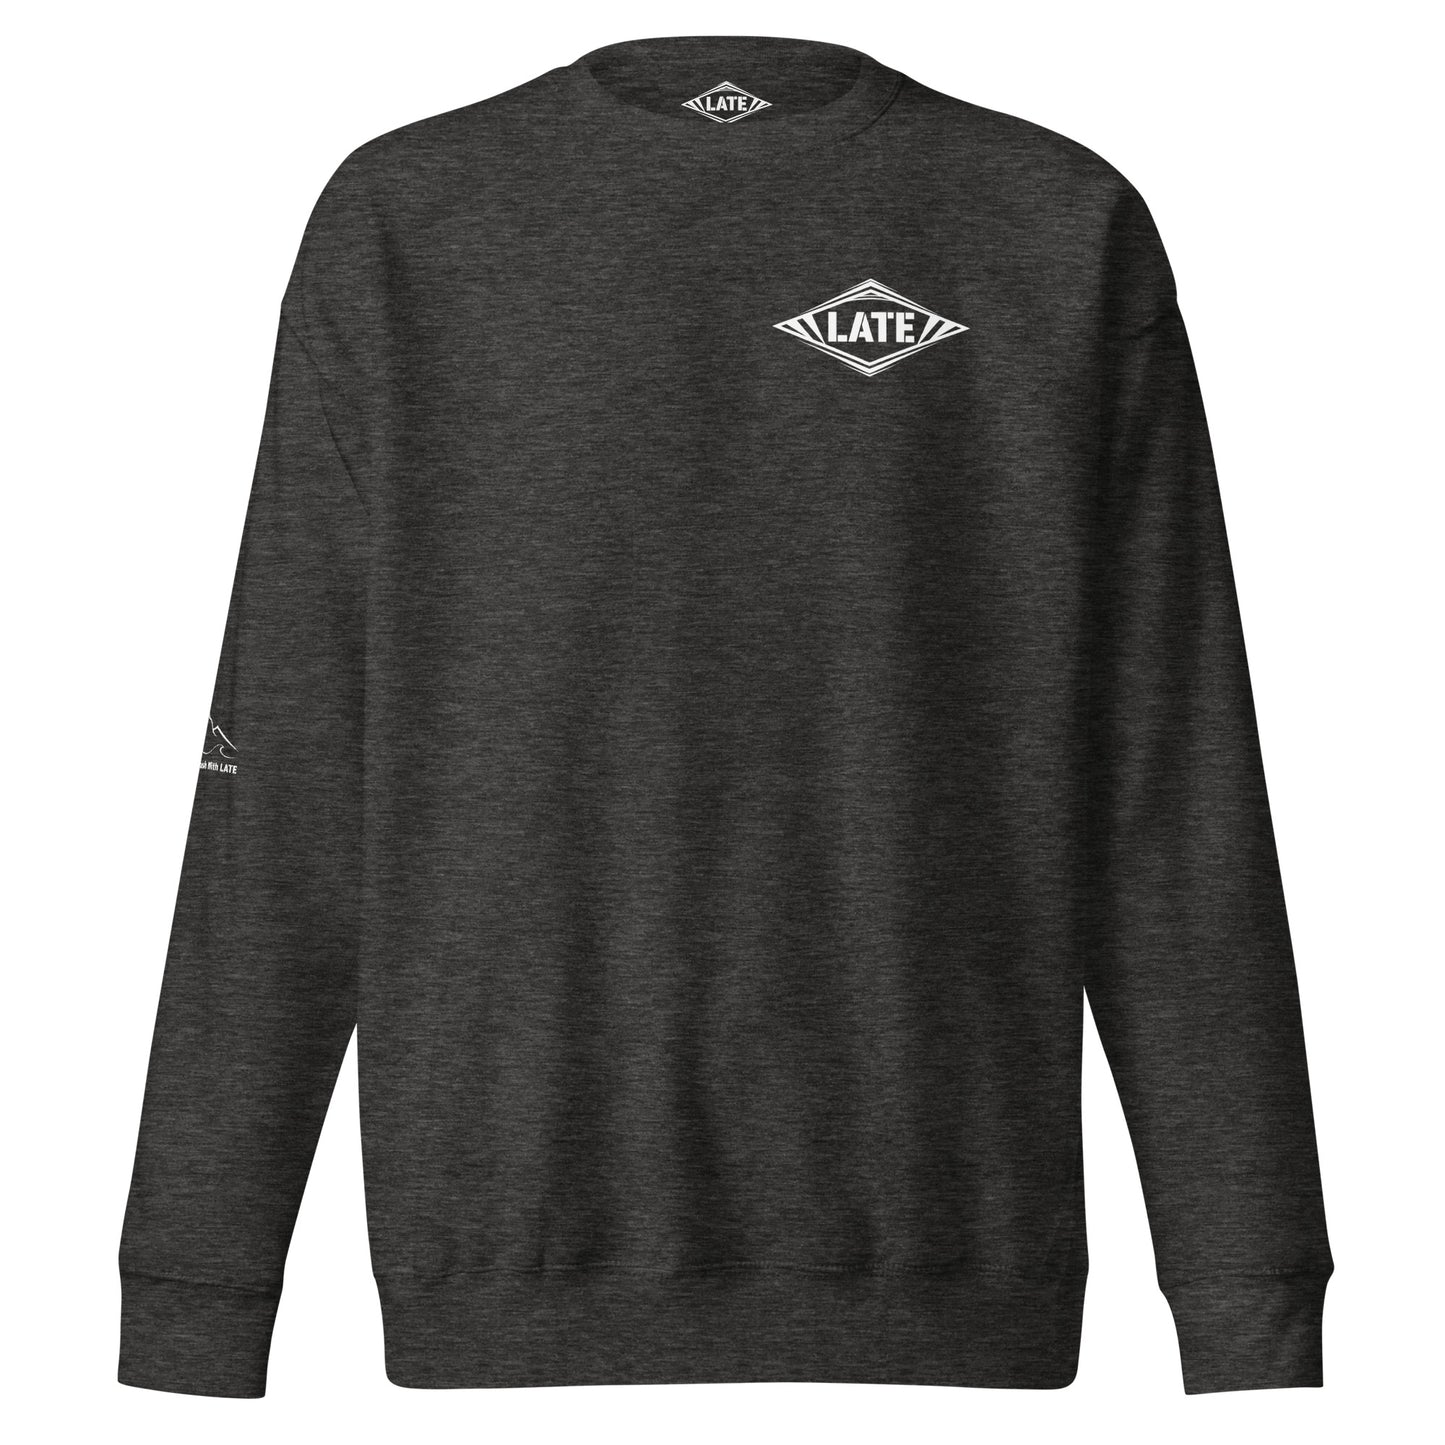 Sweatshirt snowboard Late Classics, syle the north face logo Late sweat de face couleur charcoal heather